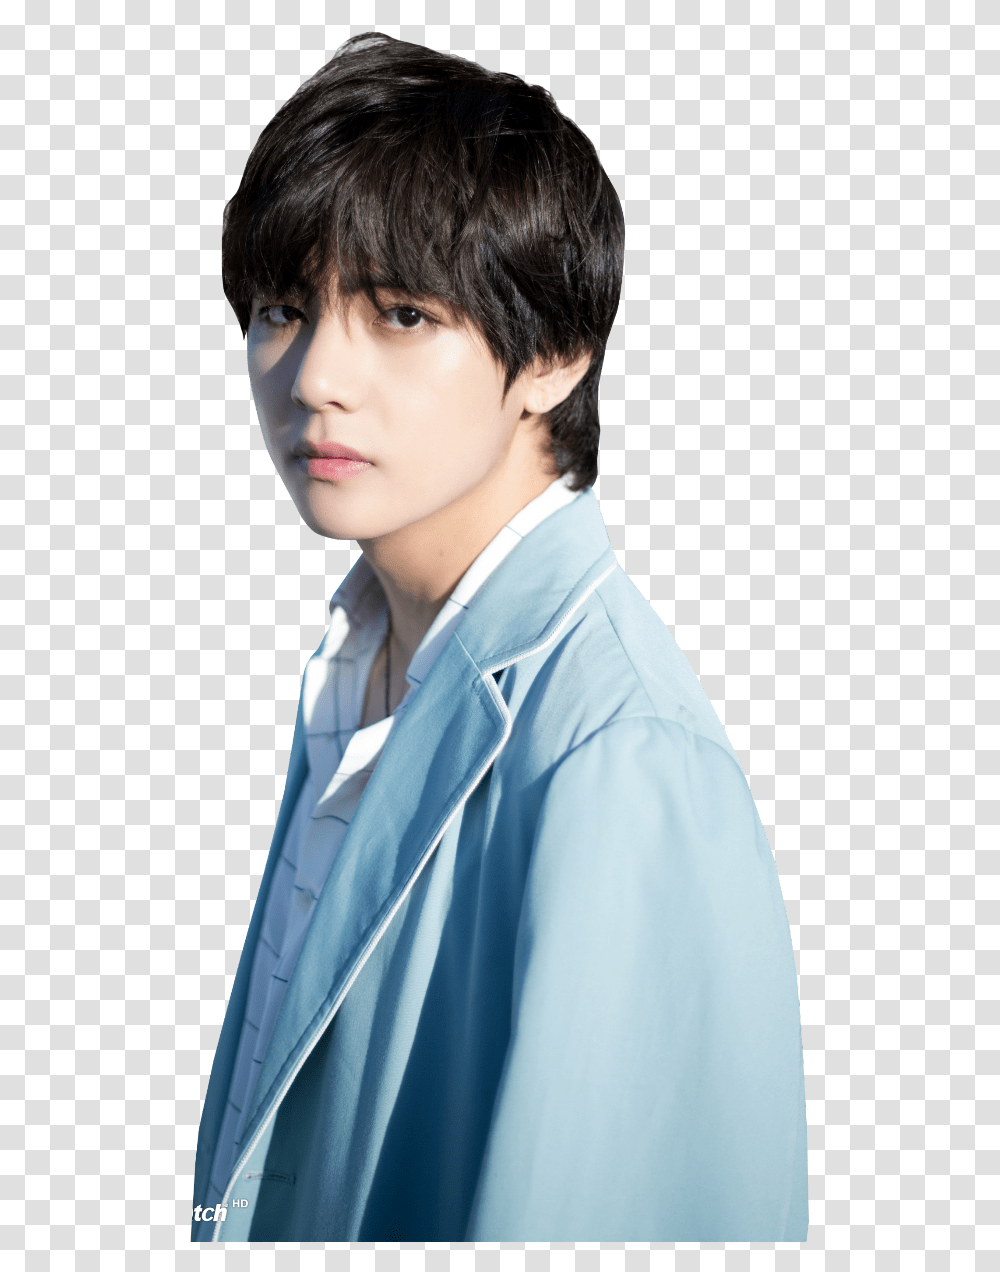 Image About Kpop In Bts By Noor Lightwood Bts V, Person, Human, Face, Hair Transparent Png